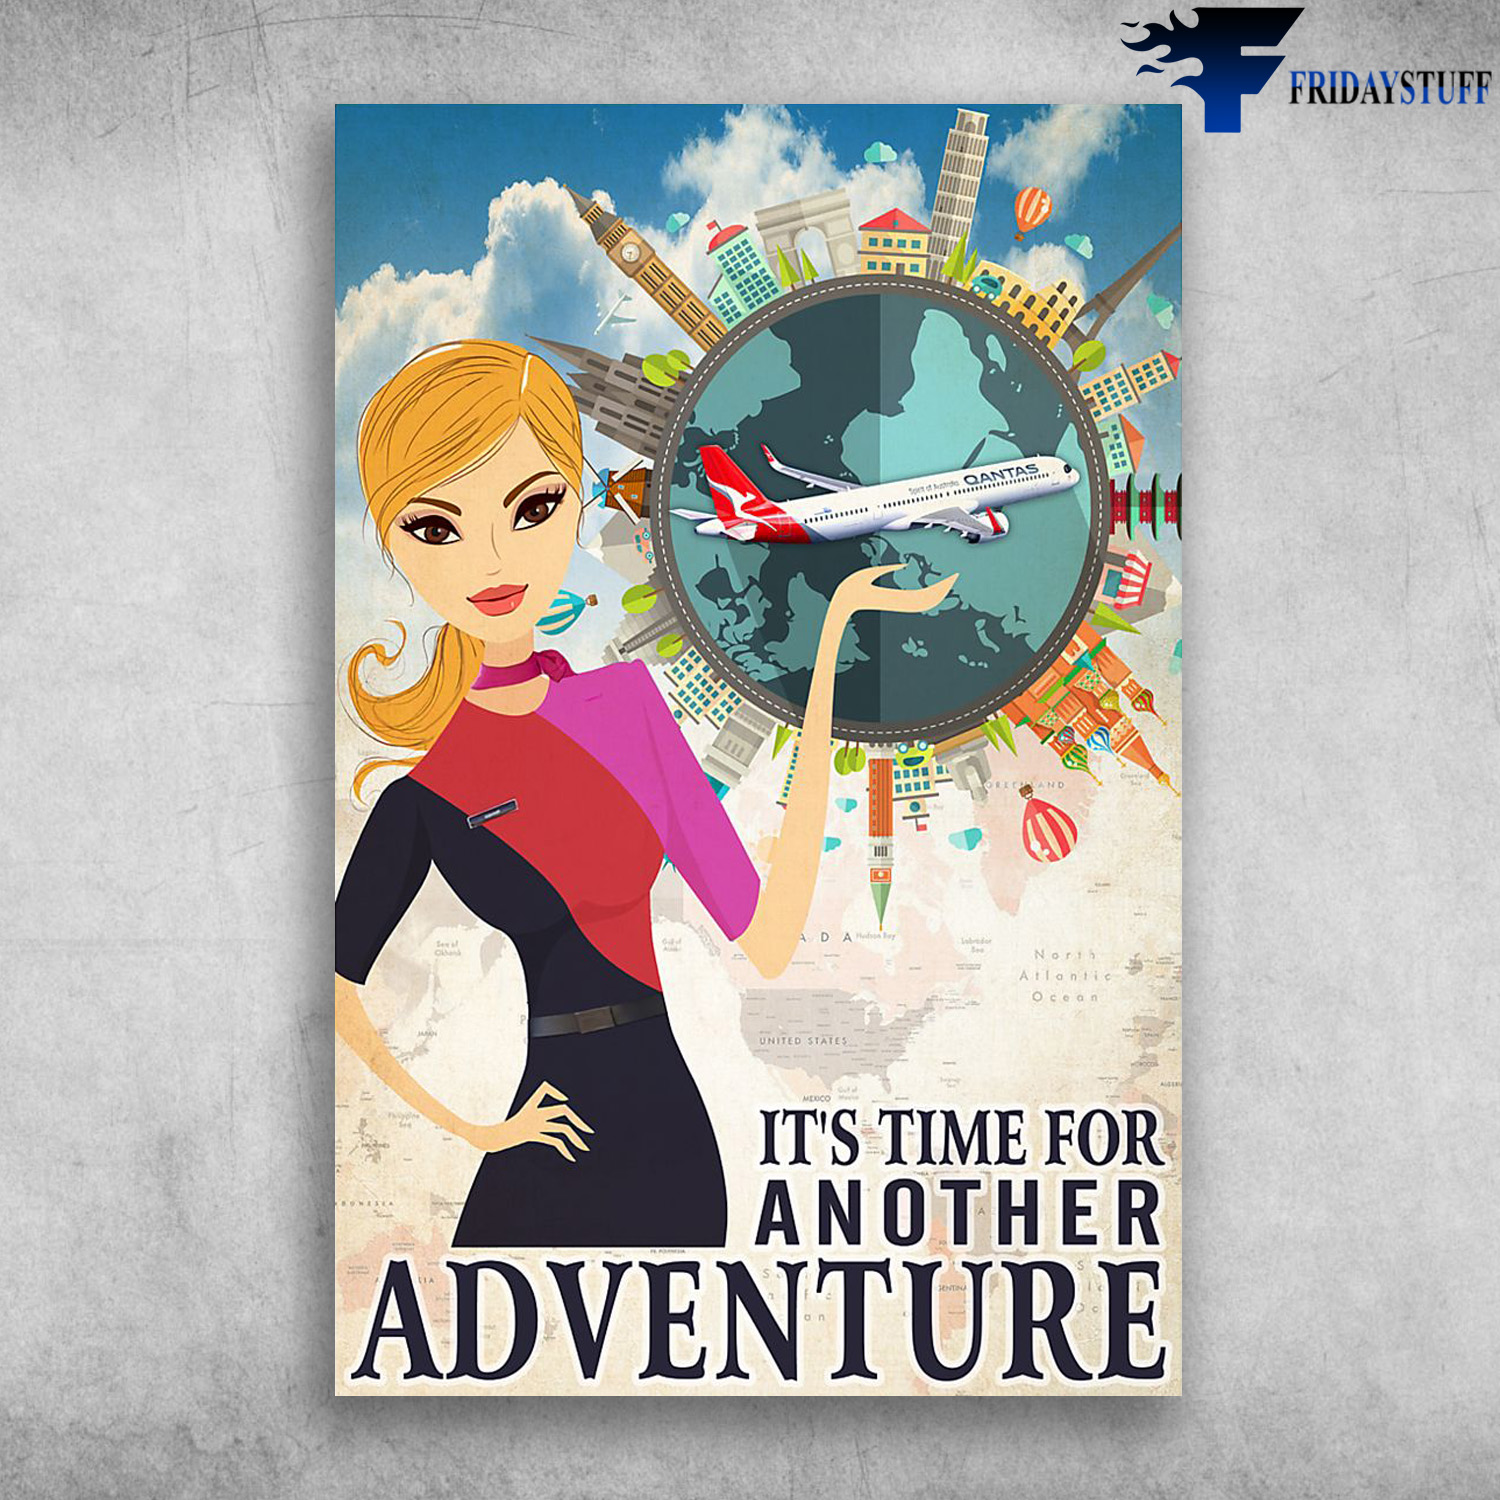 Flight Attendant - It’s Time For Another Adventure